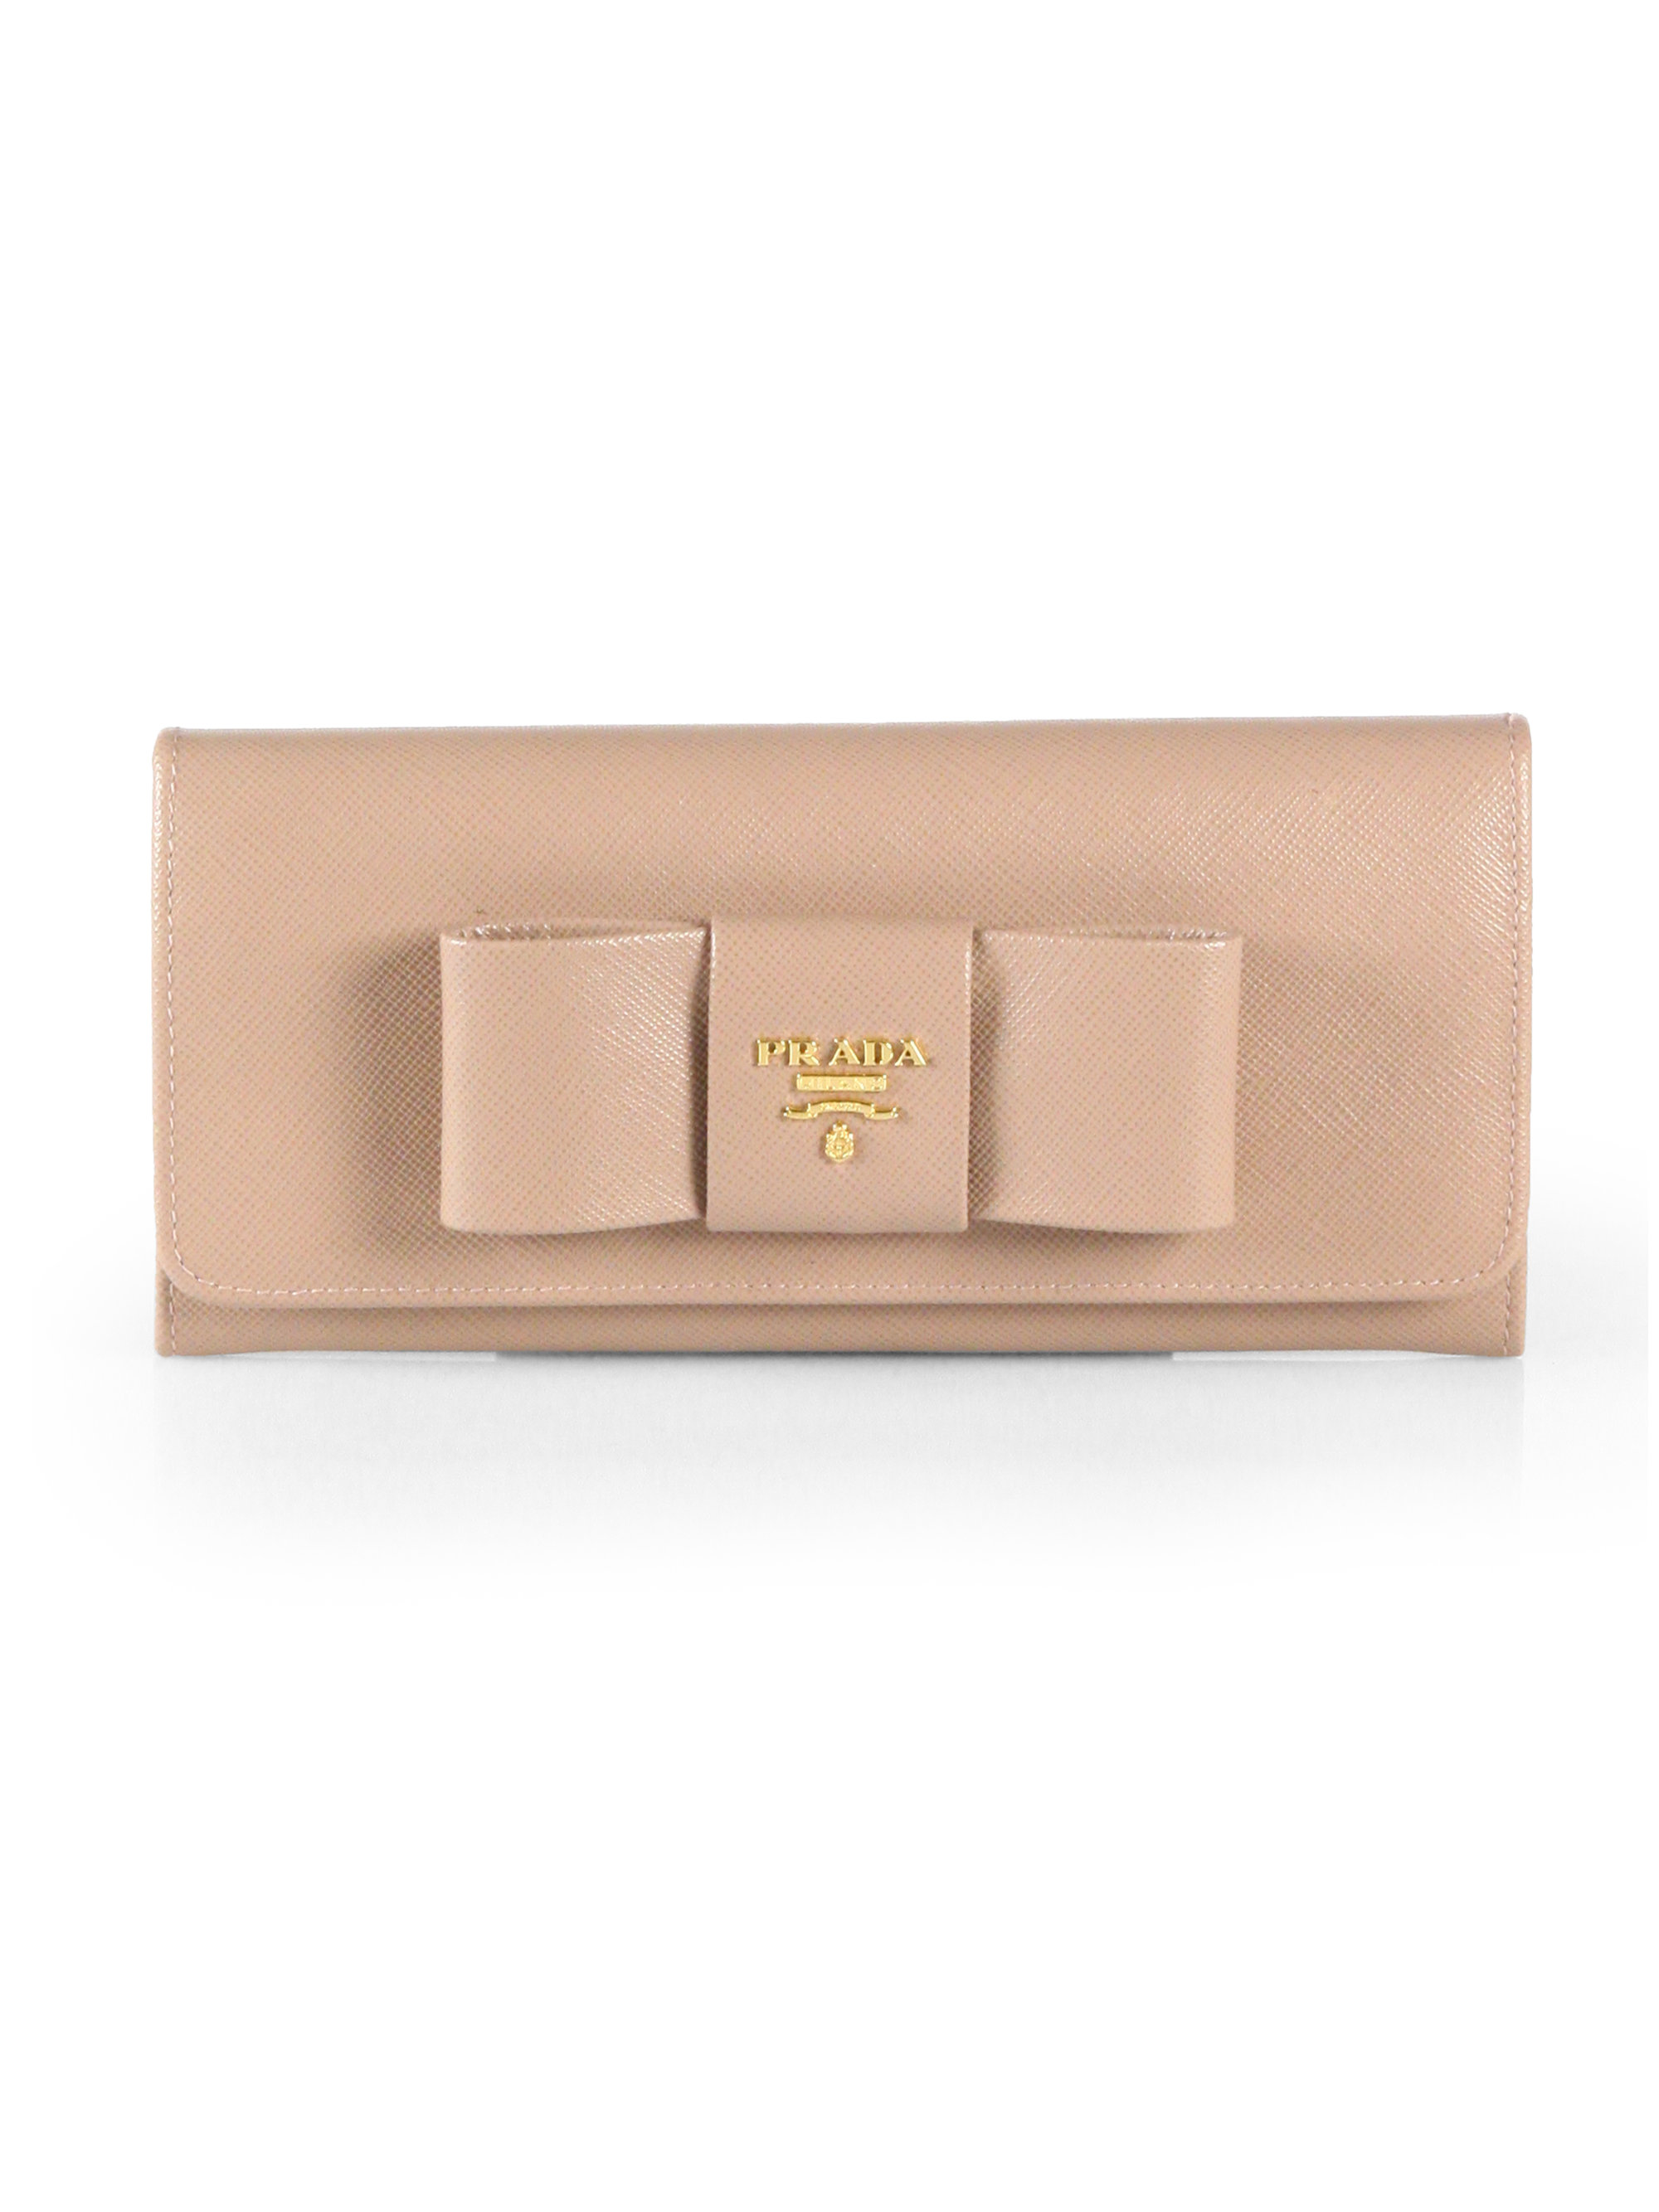 Prada Bow Leather Continental Wallet in Pink - Lyst